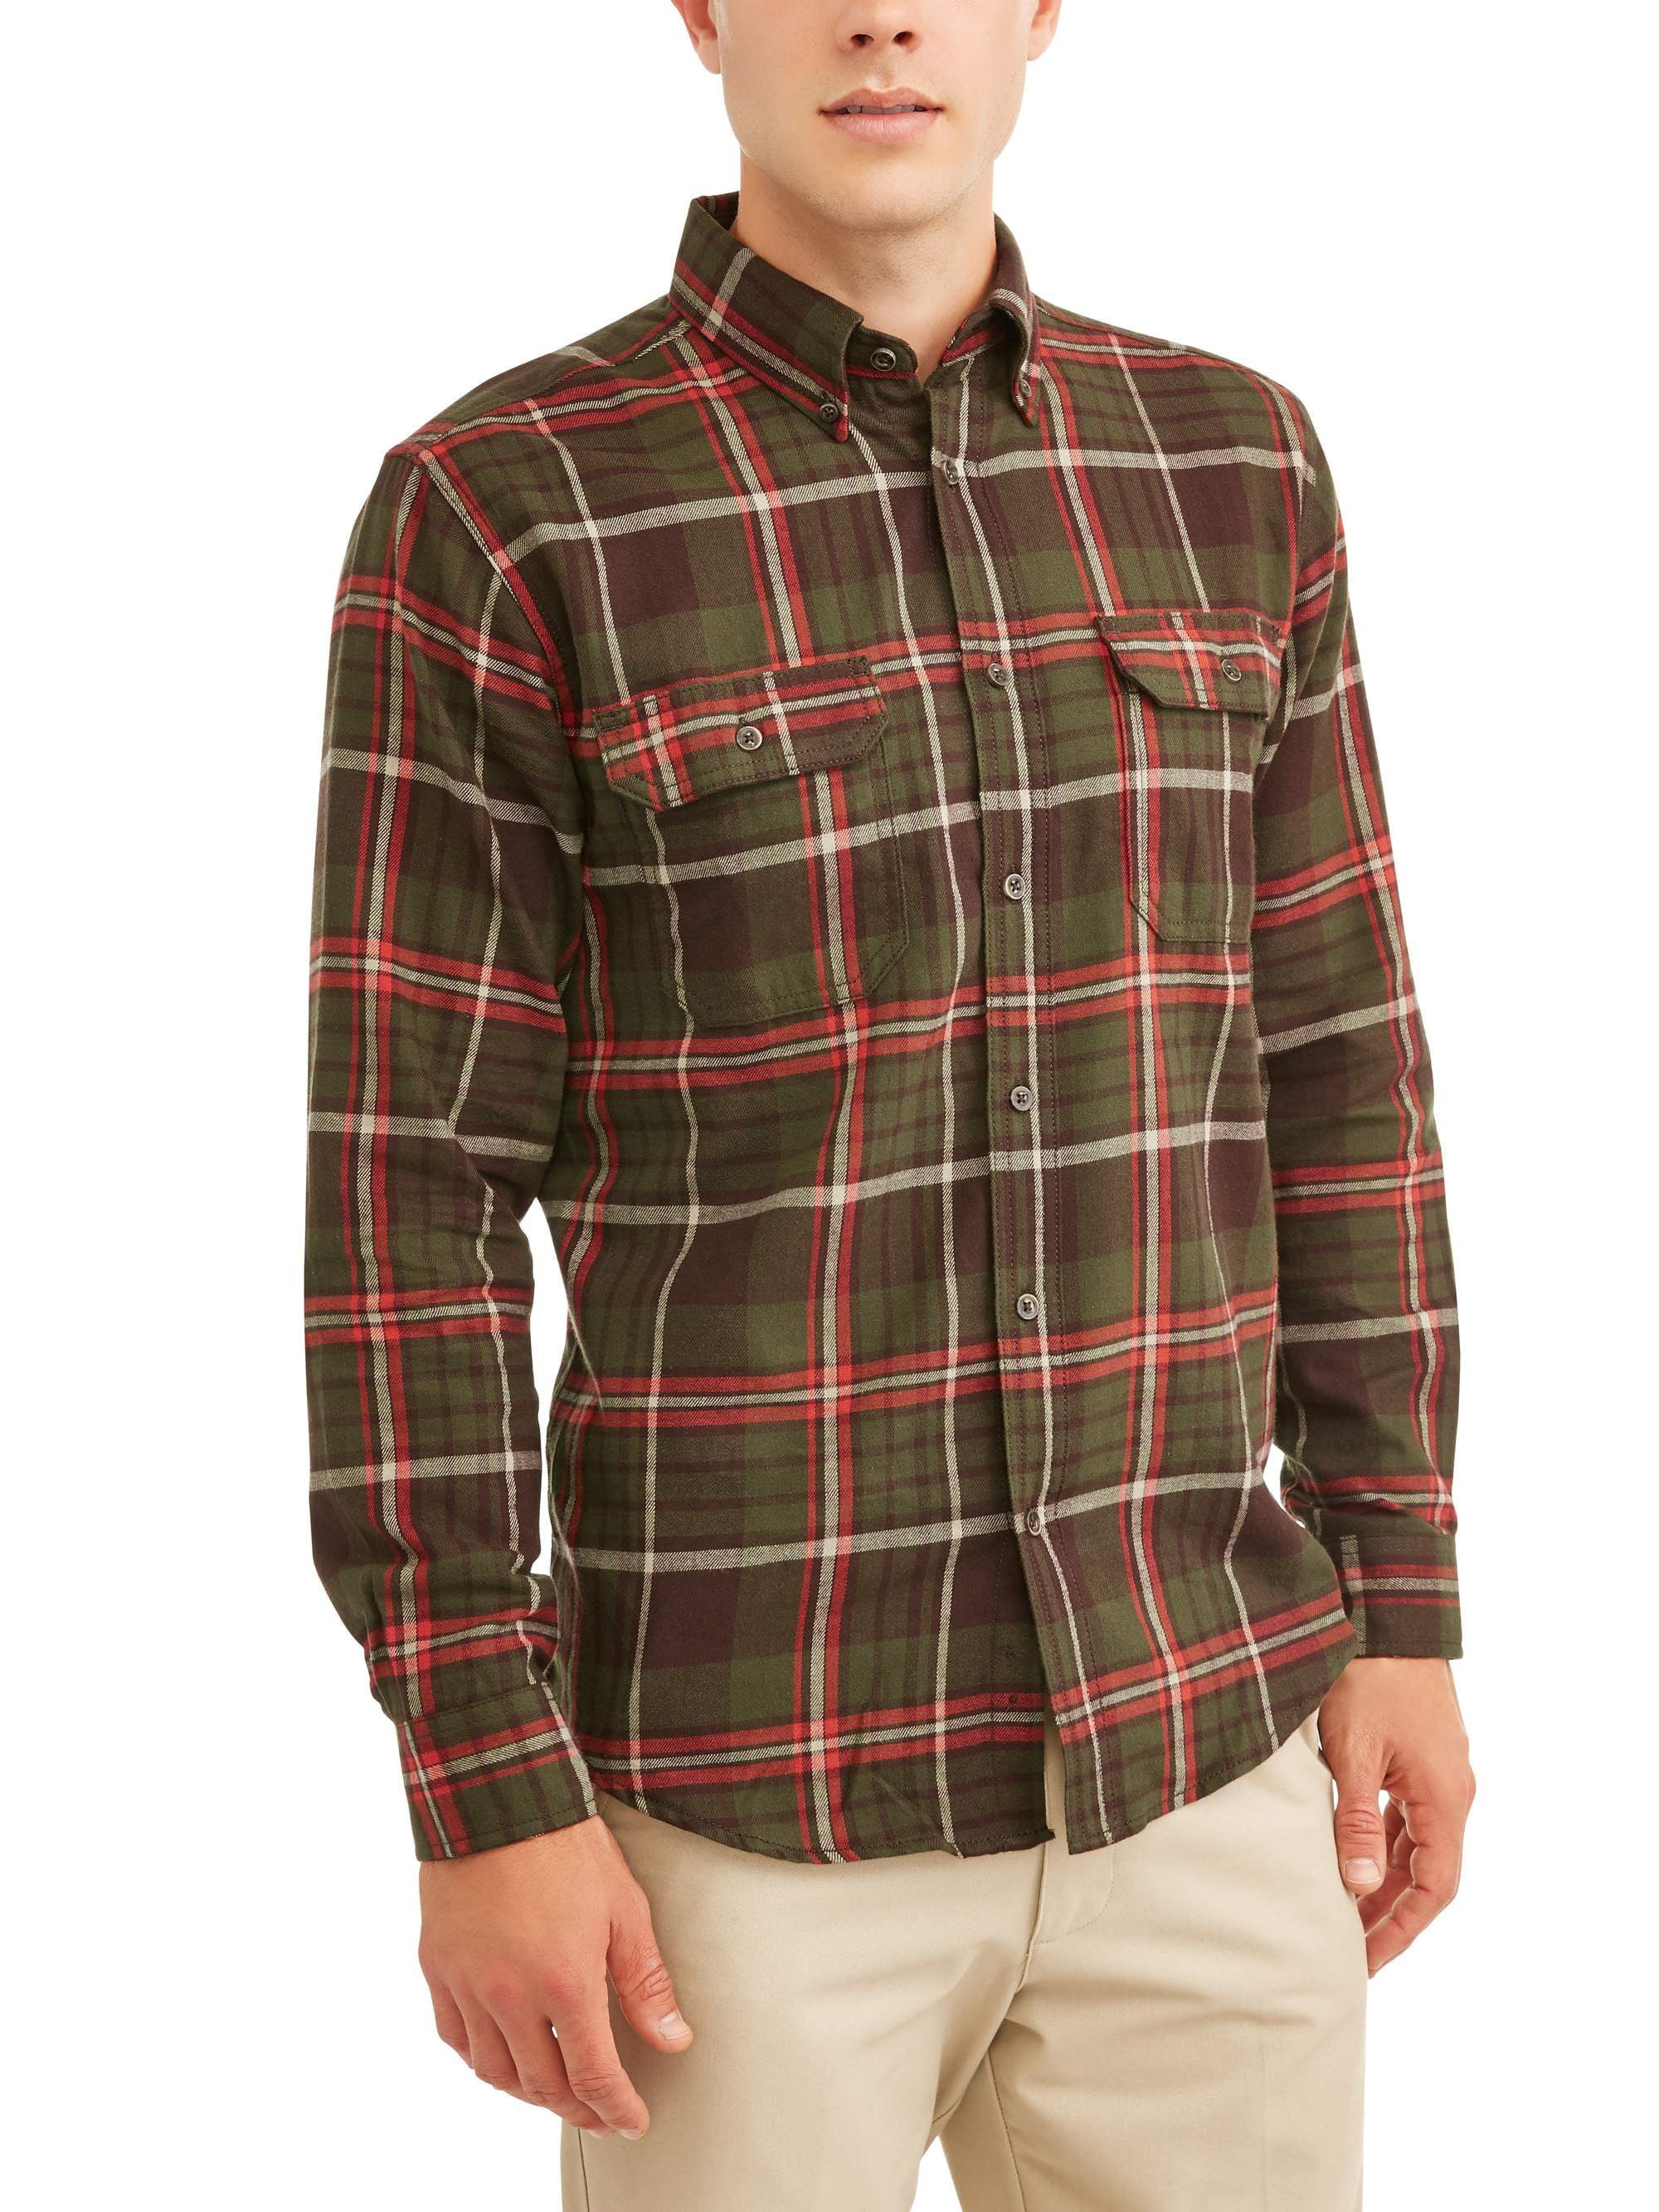 George - George Men's and Big & Tall Long Sleeve Flannel Shirt, up to ...